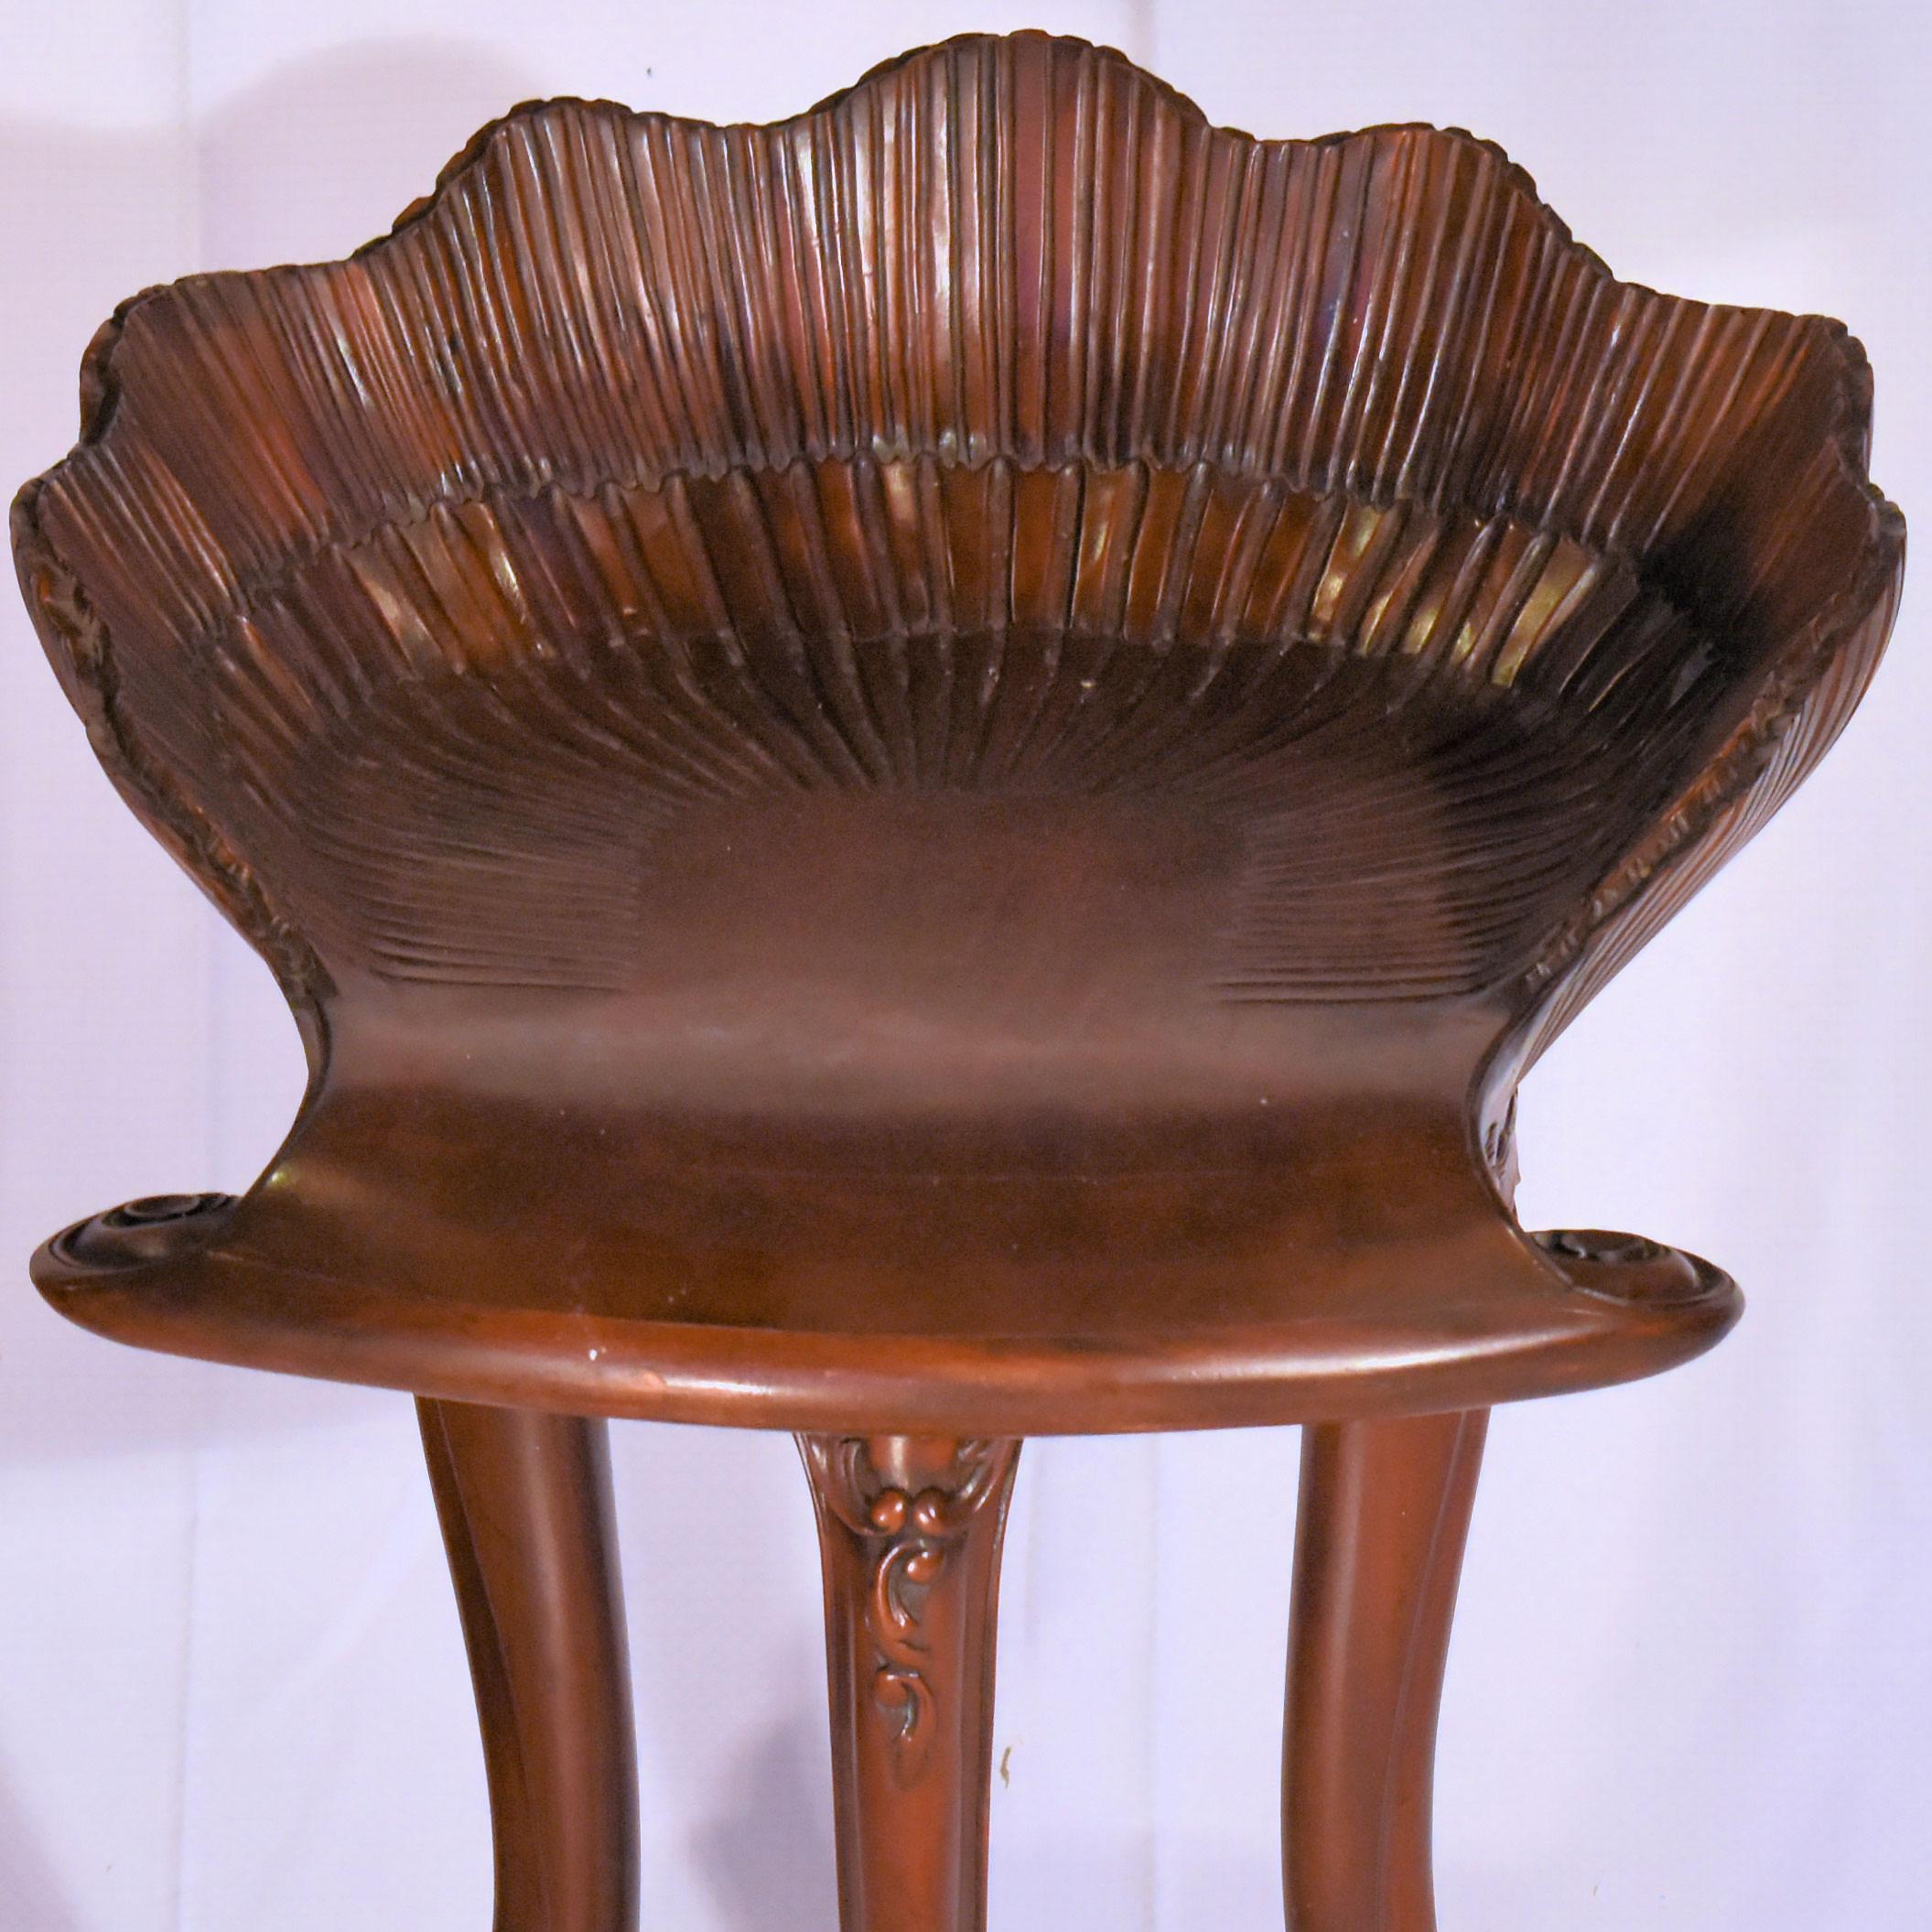 This carved antique fruitwood grotto stool was created in Italy, circa 1950. Perfect as a piano stool or simply a statement piece, the seat has a 